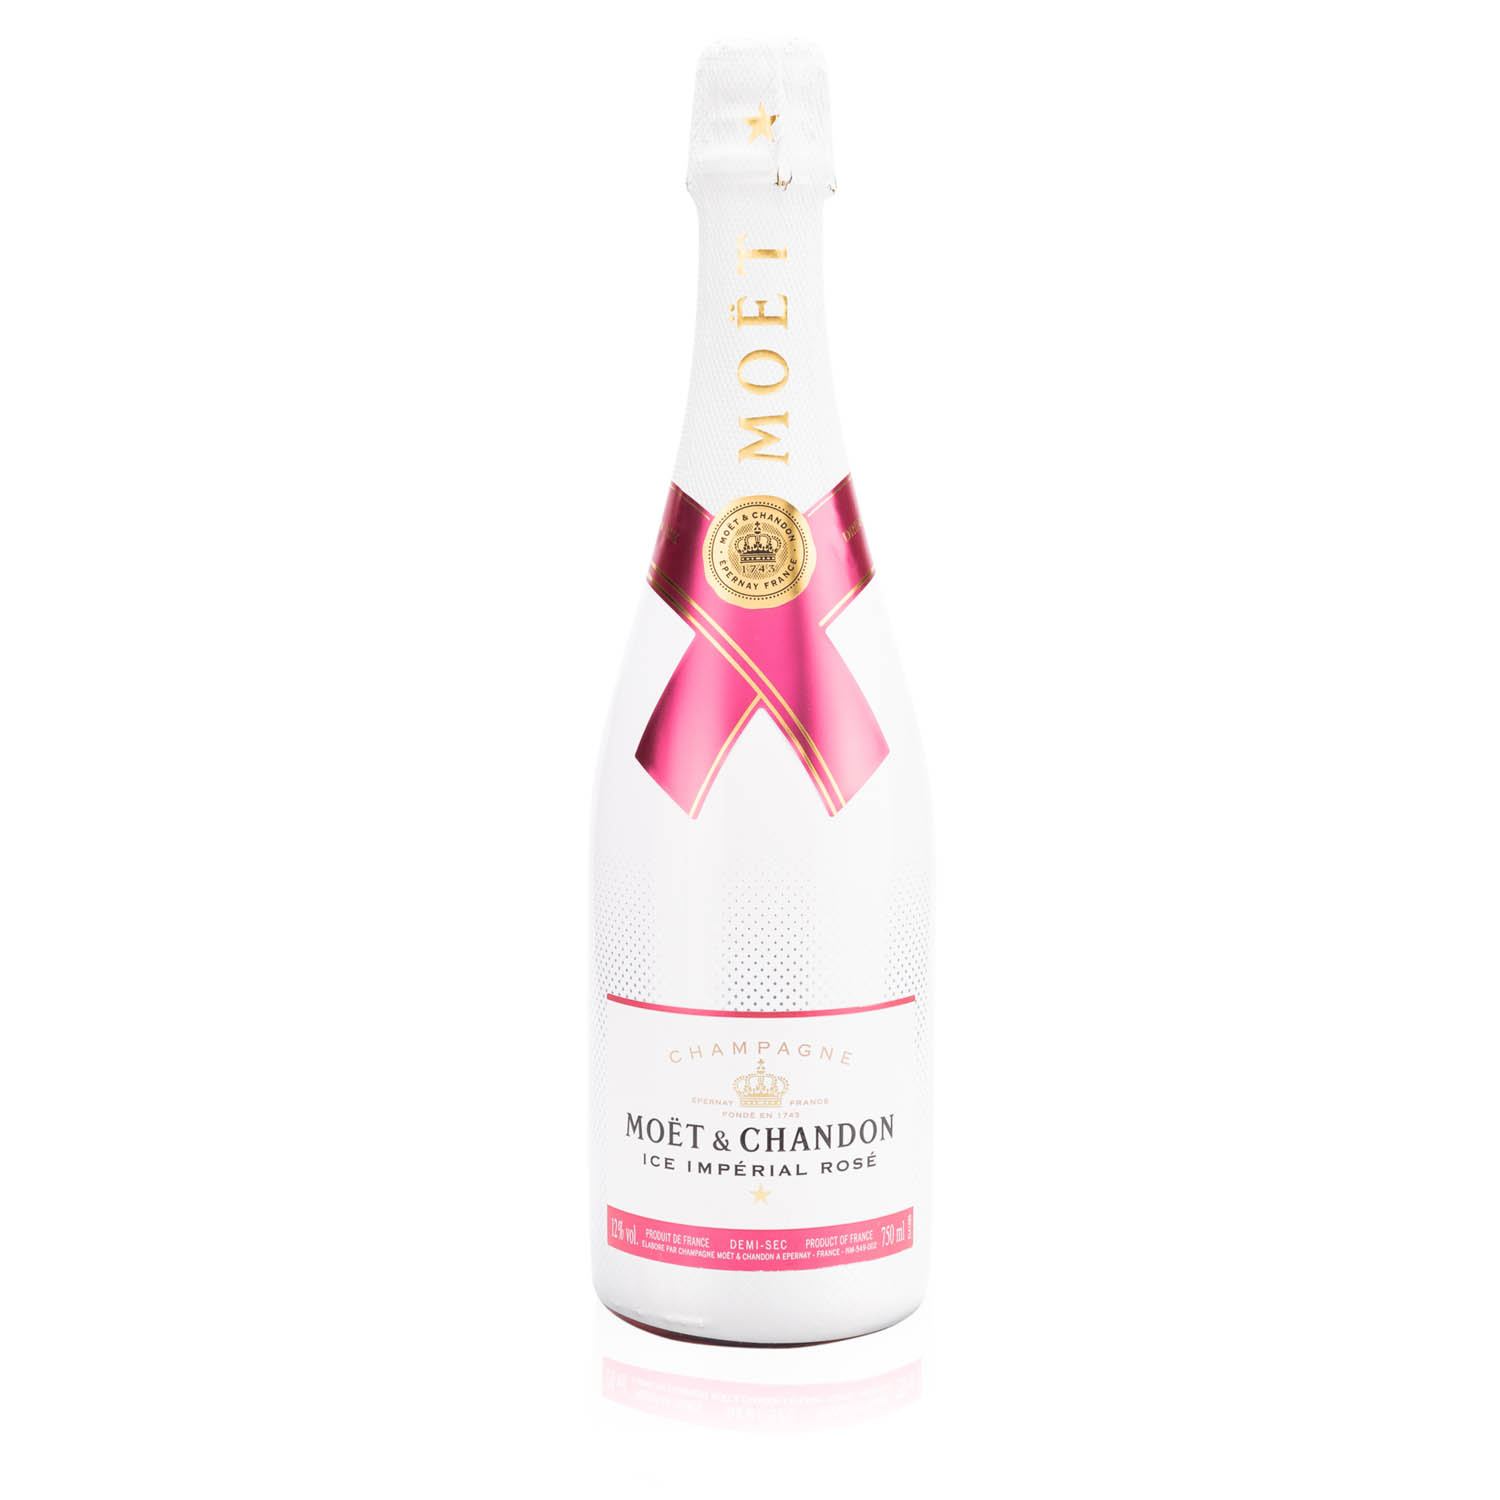 Champagne Moët & Chandon Ice Imperial Rose